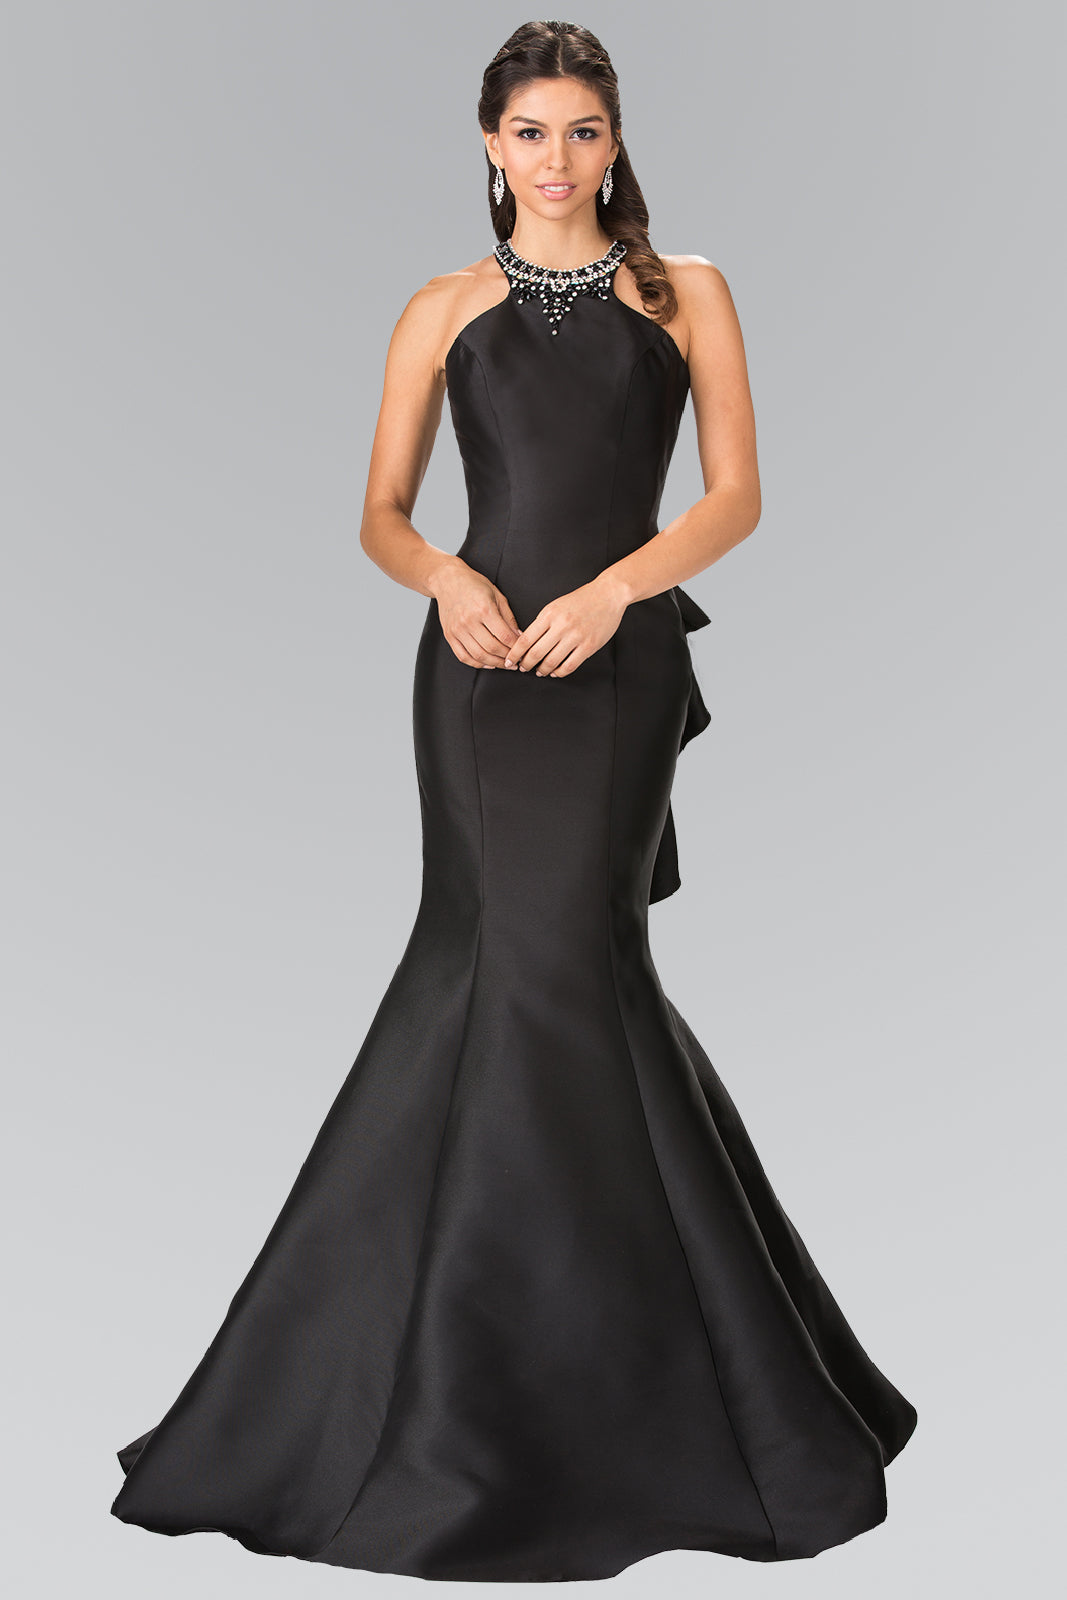 High Neck Jeweled Collar Mermaid Dress with Open Back and Ruffles GLGL2353 Elsy Style PROM